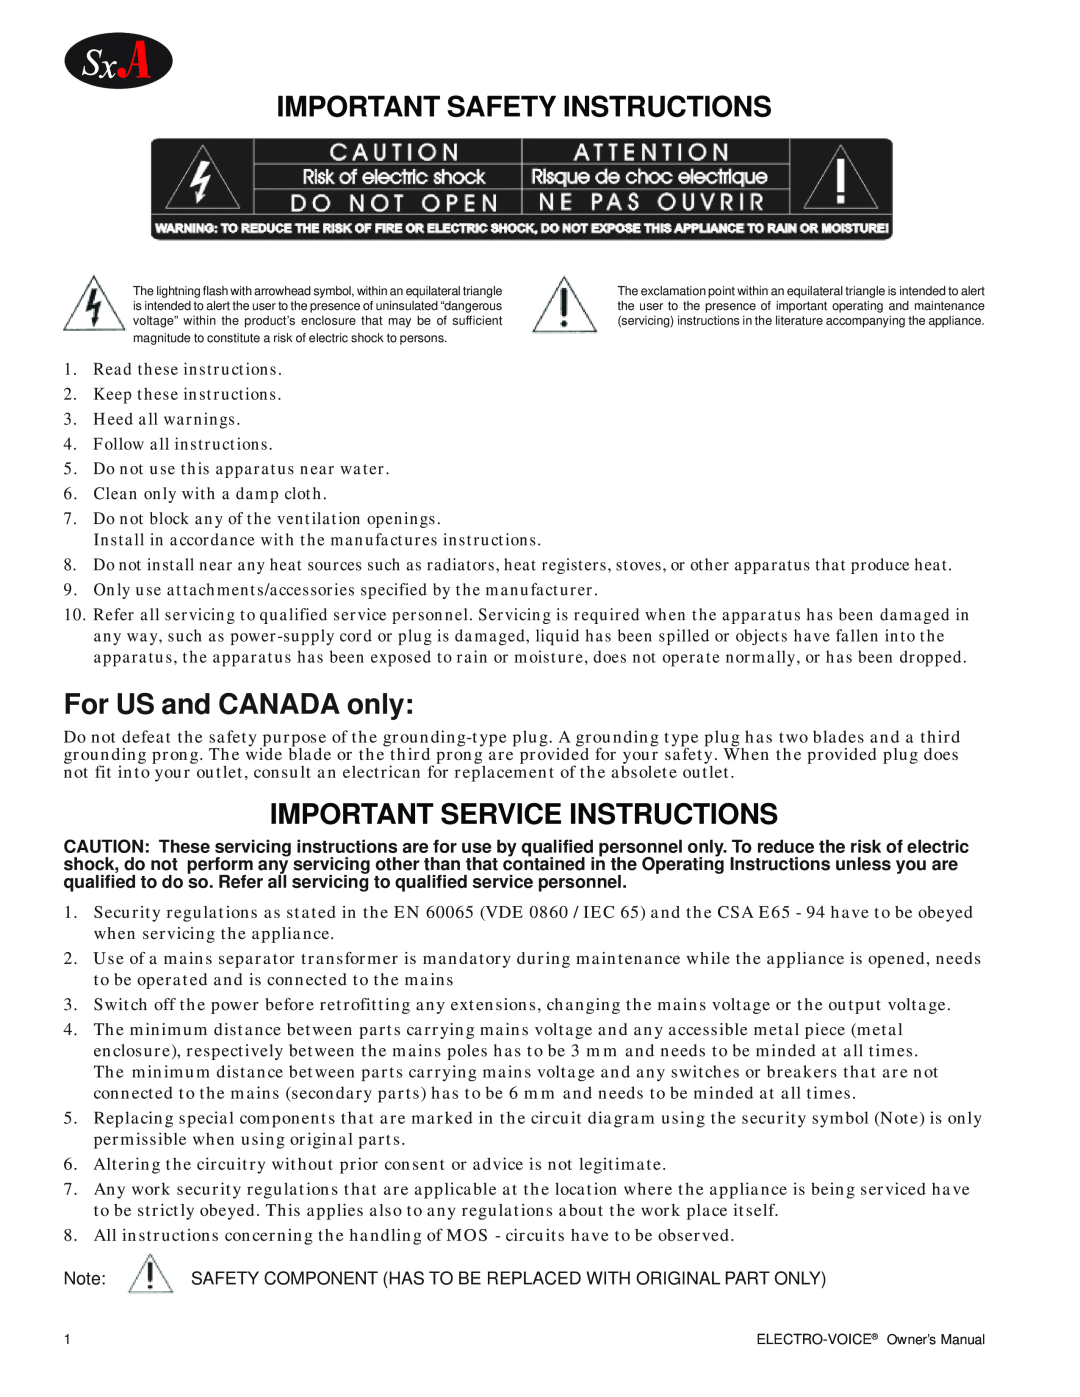 Electro-Voice SxA100+ owner manual Important Safety Instructions, For US and CANADA only, Important Service Instructions 